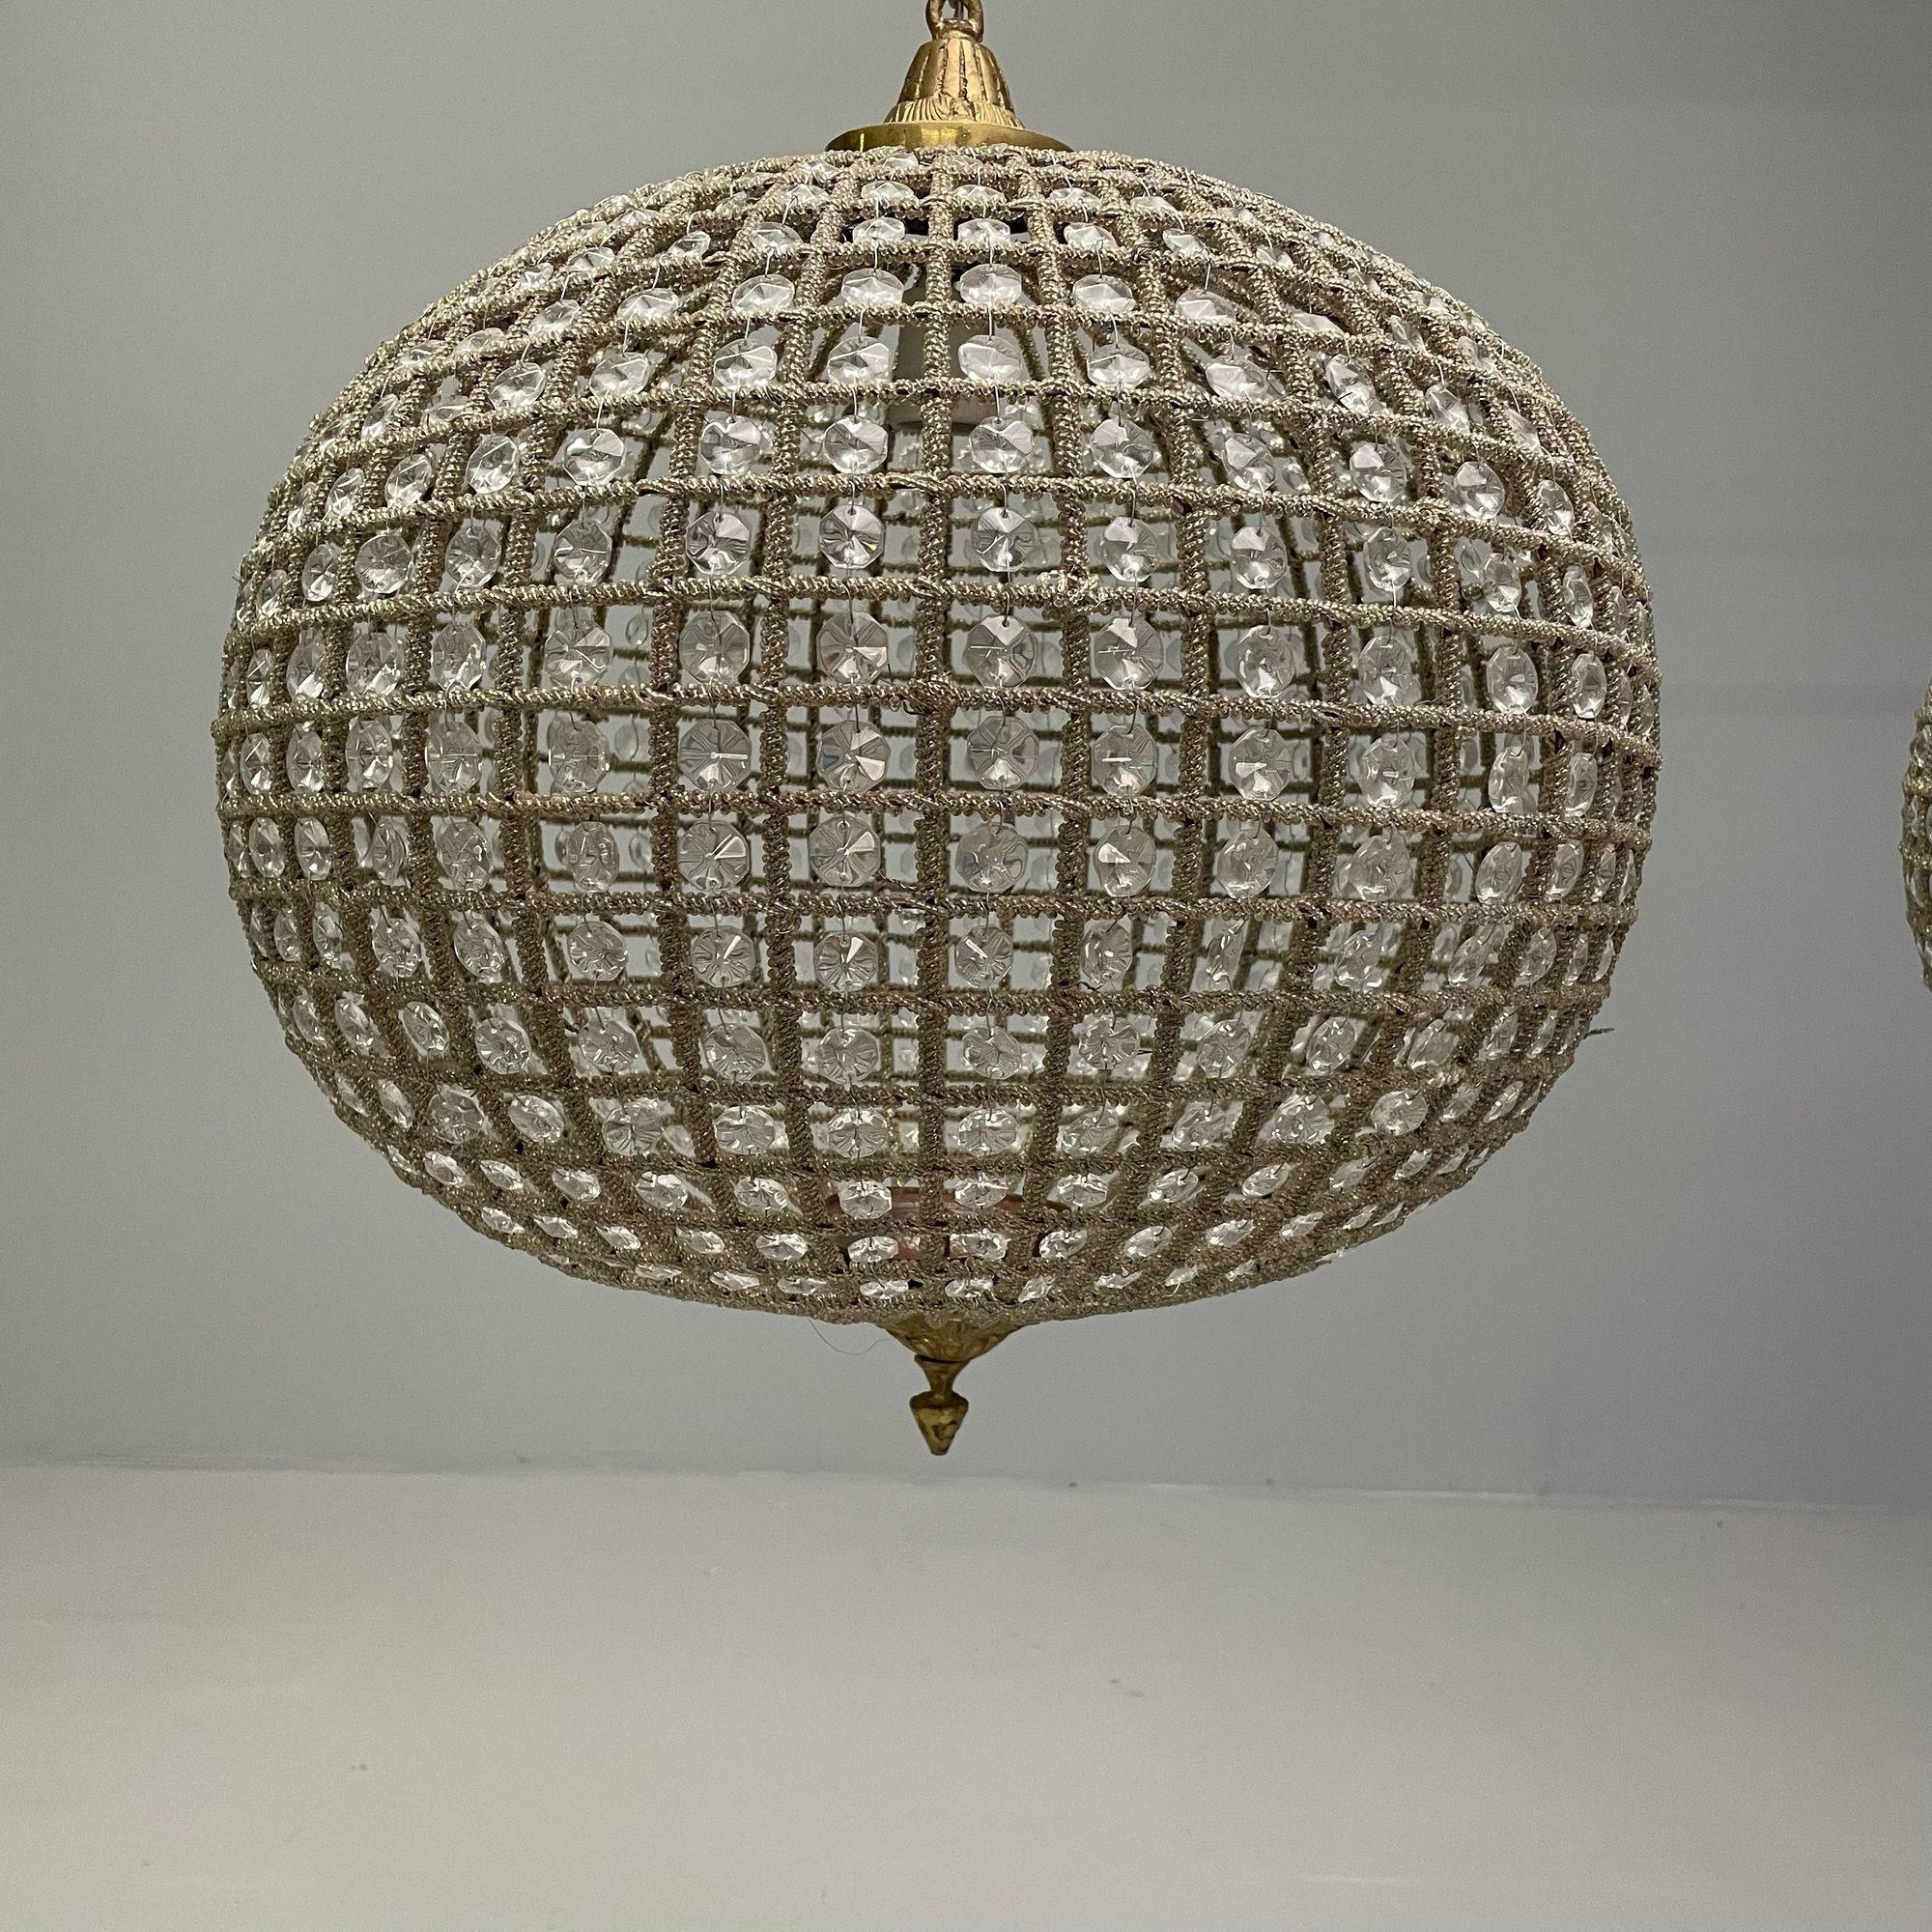 20th Century Art Deco, Round Chandeliers, Beveled Crystal, Metal, American, 1980s For Sale